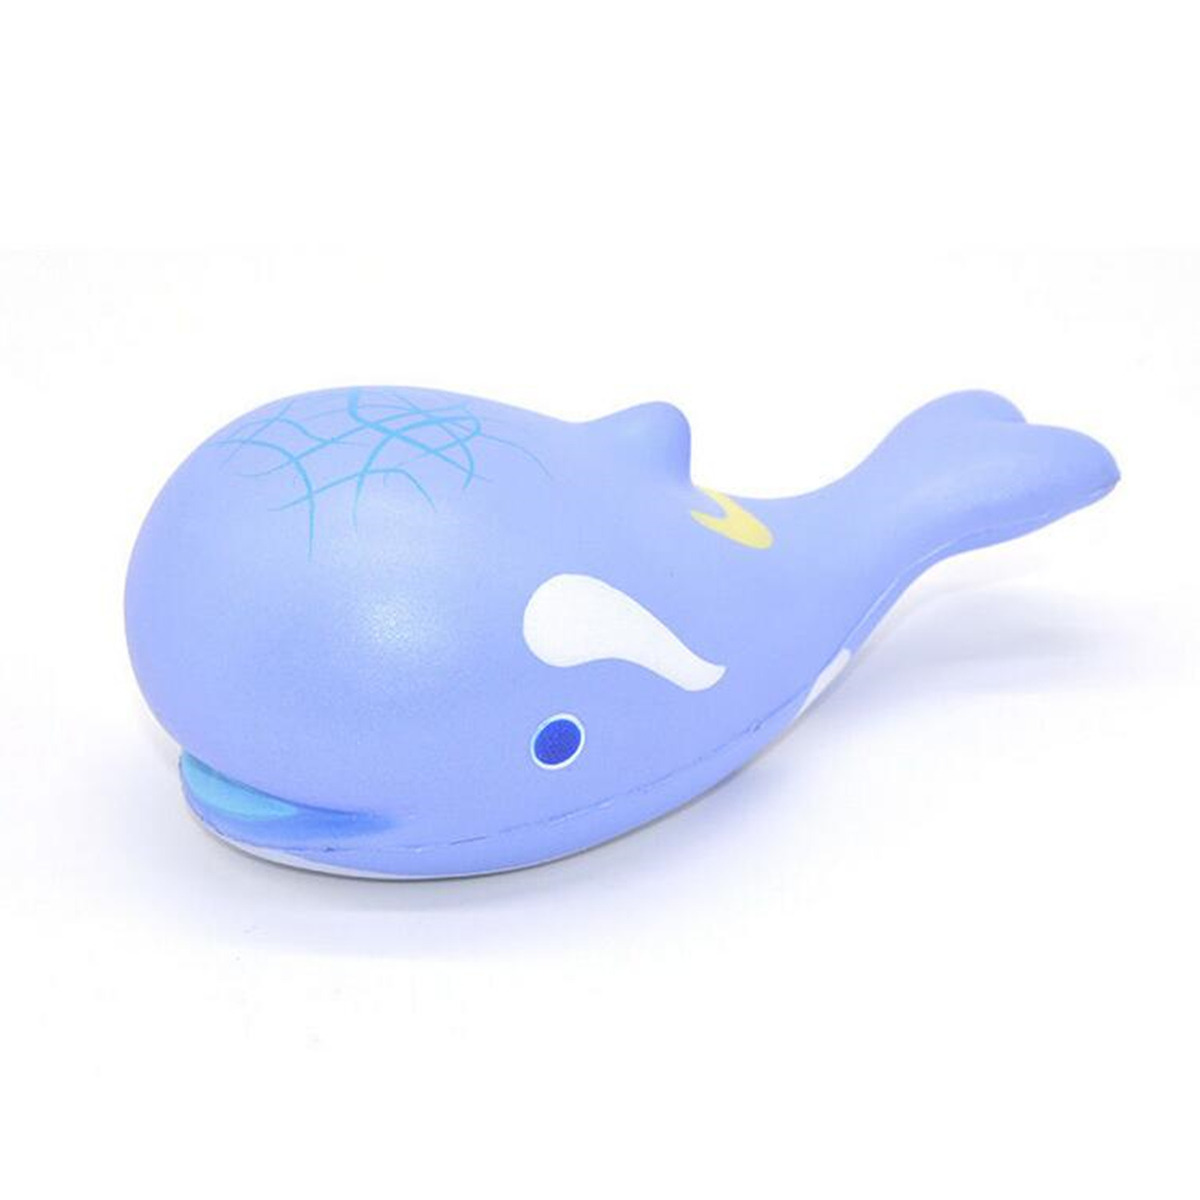 15cm-Whale-Squishy-Slow-Rising-Pressure-Release-Soft-Toy-With-Keychains-for-Iphone-Samsung-Xiaomi-1145805-3